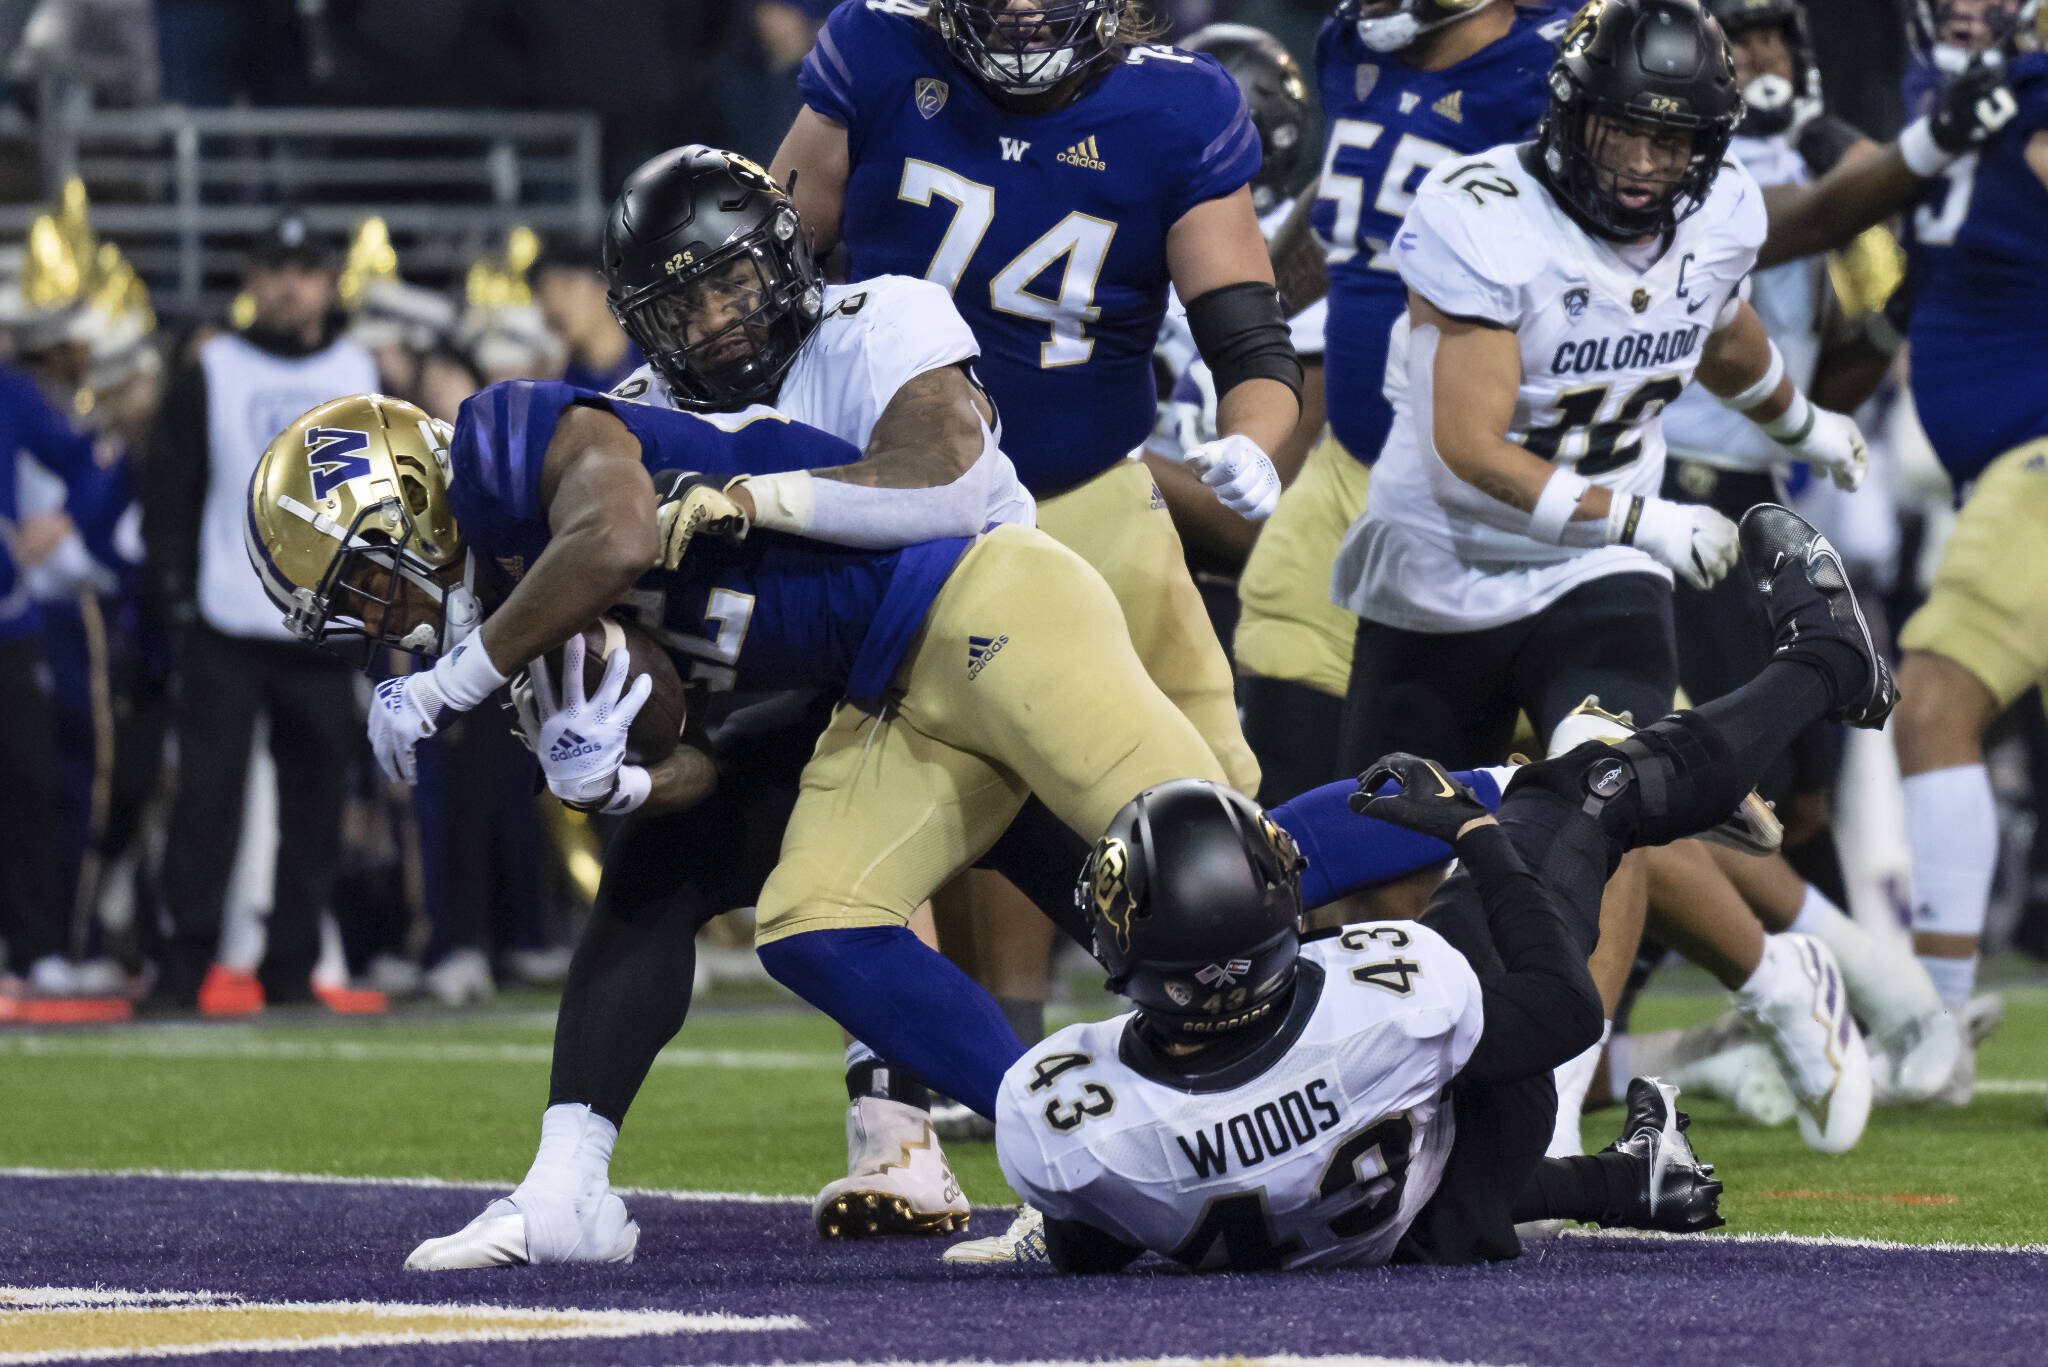 Washington running back Cameron Davis scores a touchdown during the first half of a game against Colorado on Nov. 19, 2022, in Seattle. (AP Photo/Stephen Brashear)